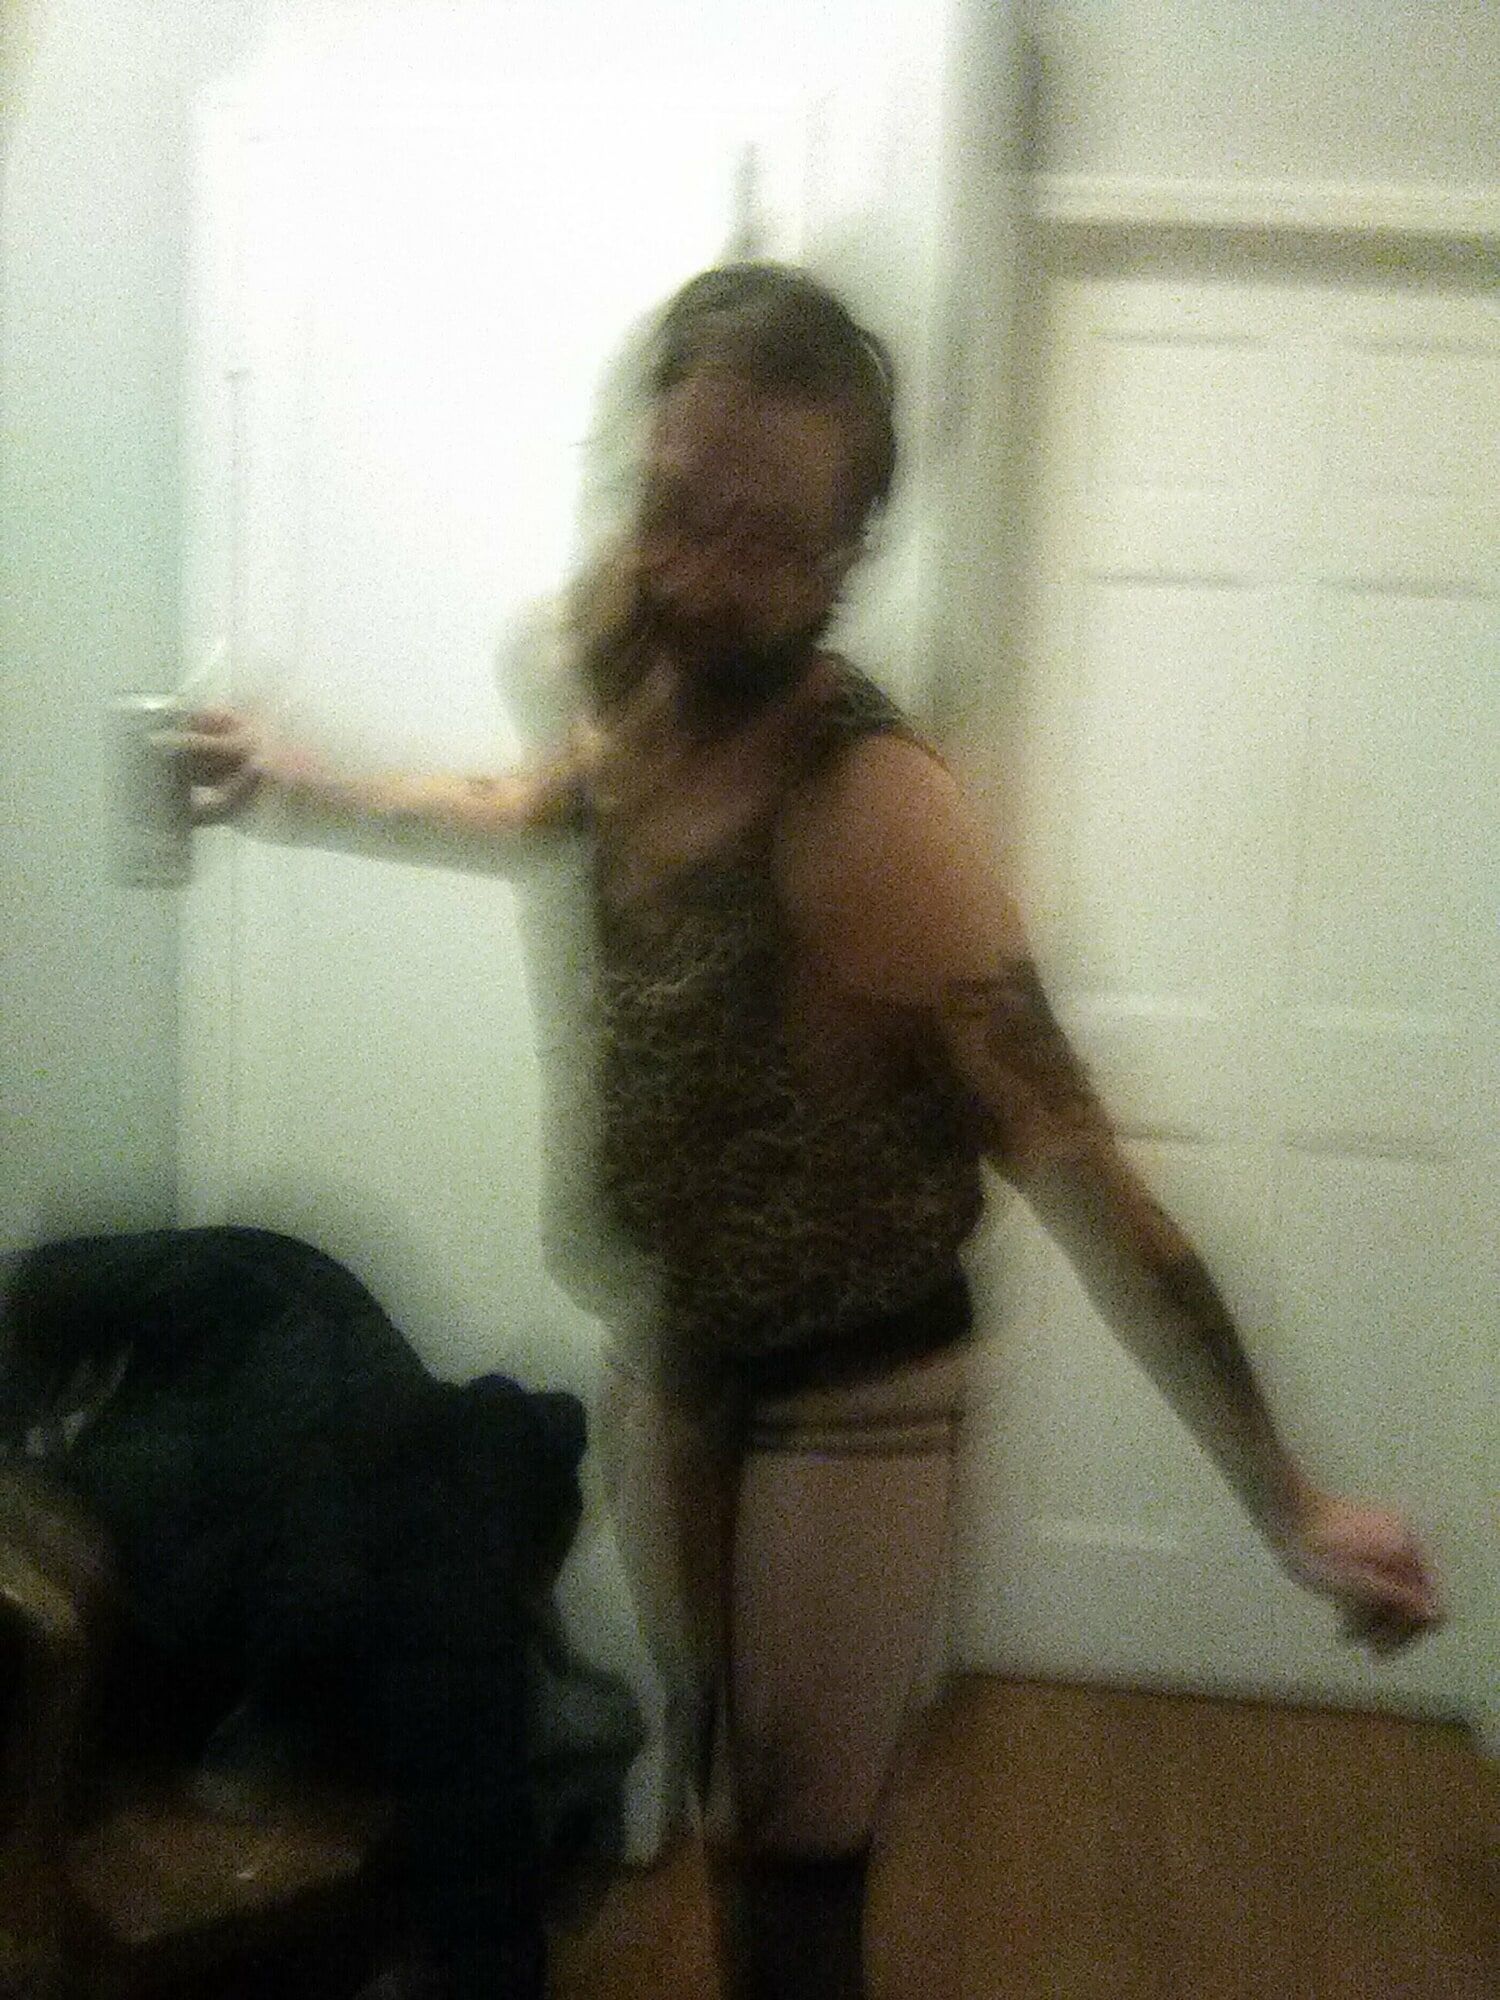 CD in ex gf apt with stranger trying on her clothes  #6